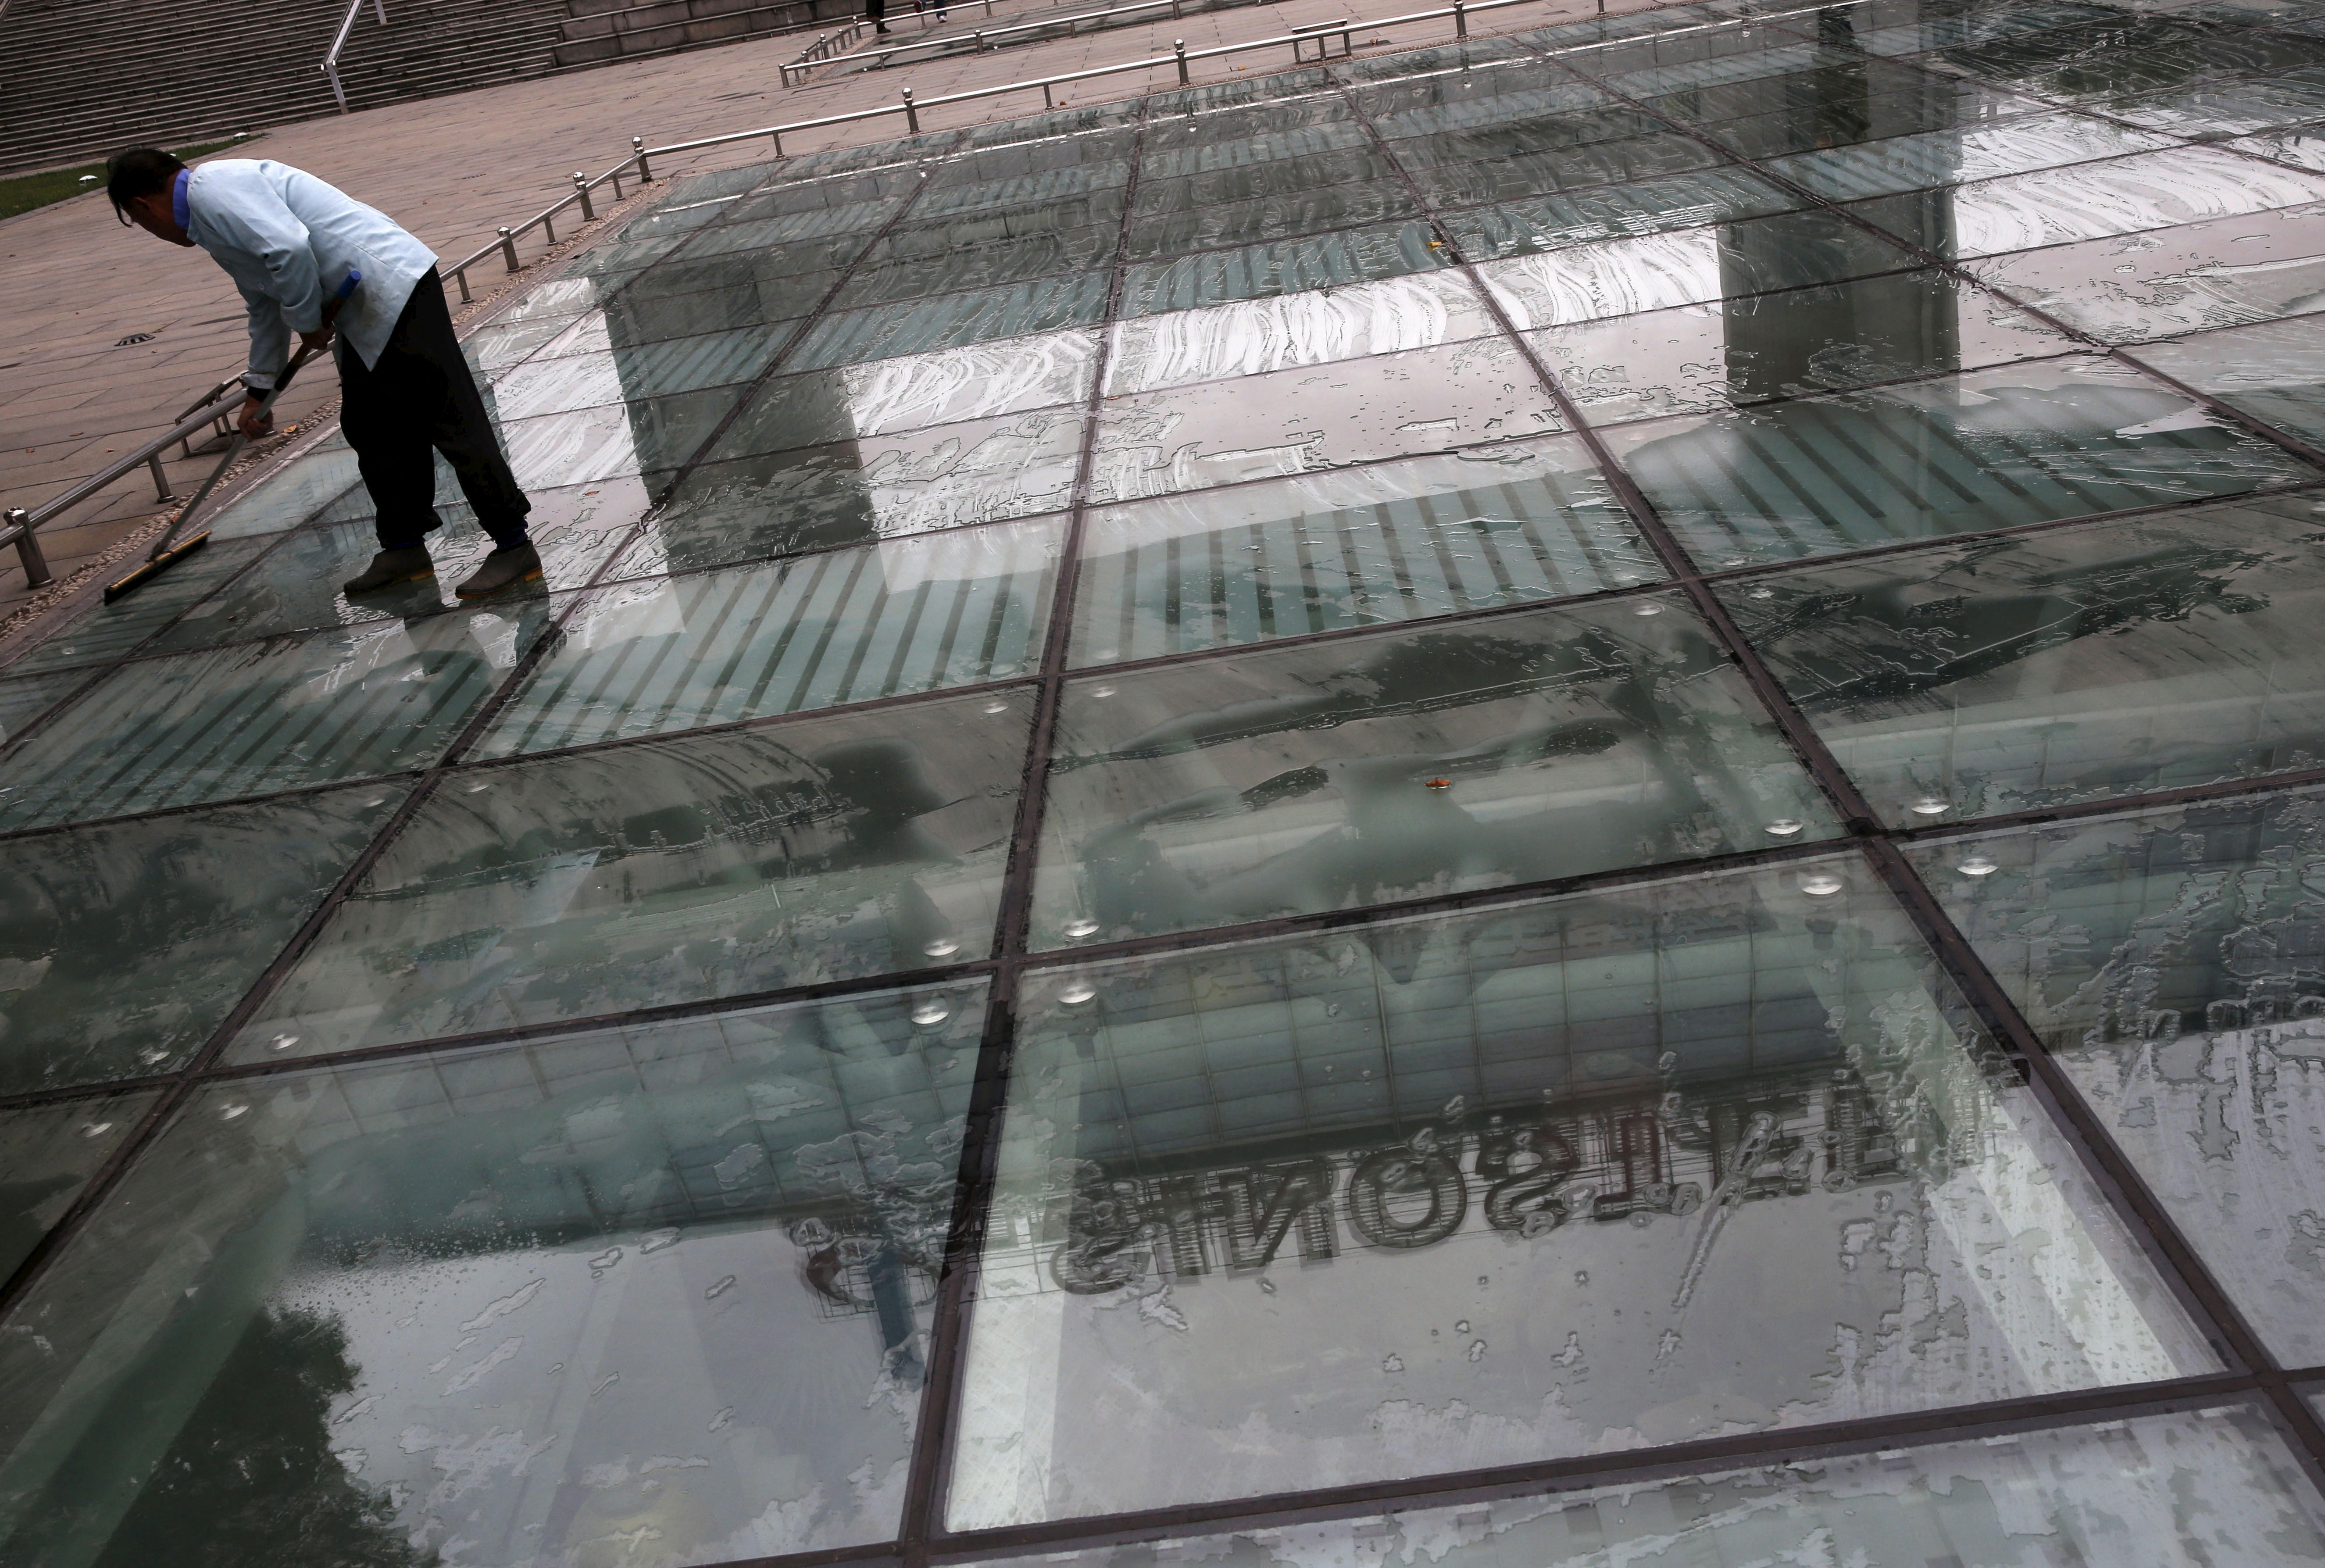 A worker cleans a glass floor reflecting Sinosteel's logo, in front of itsheadquarters building in Beijing